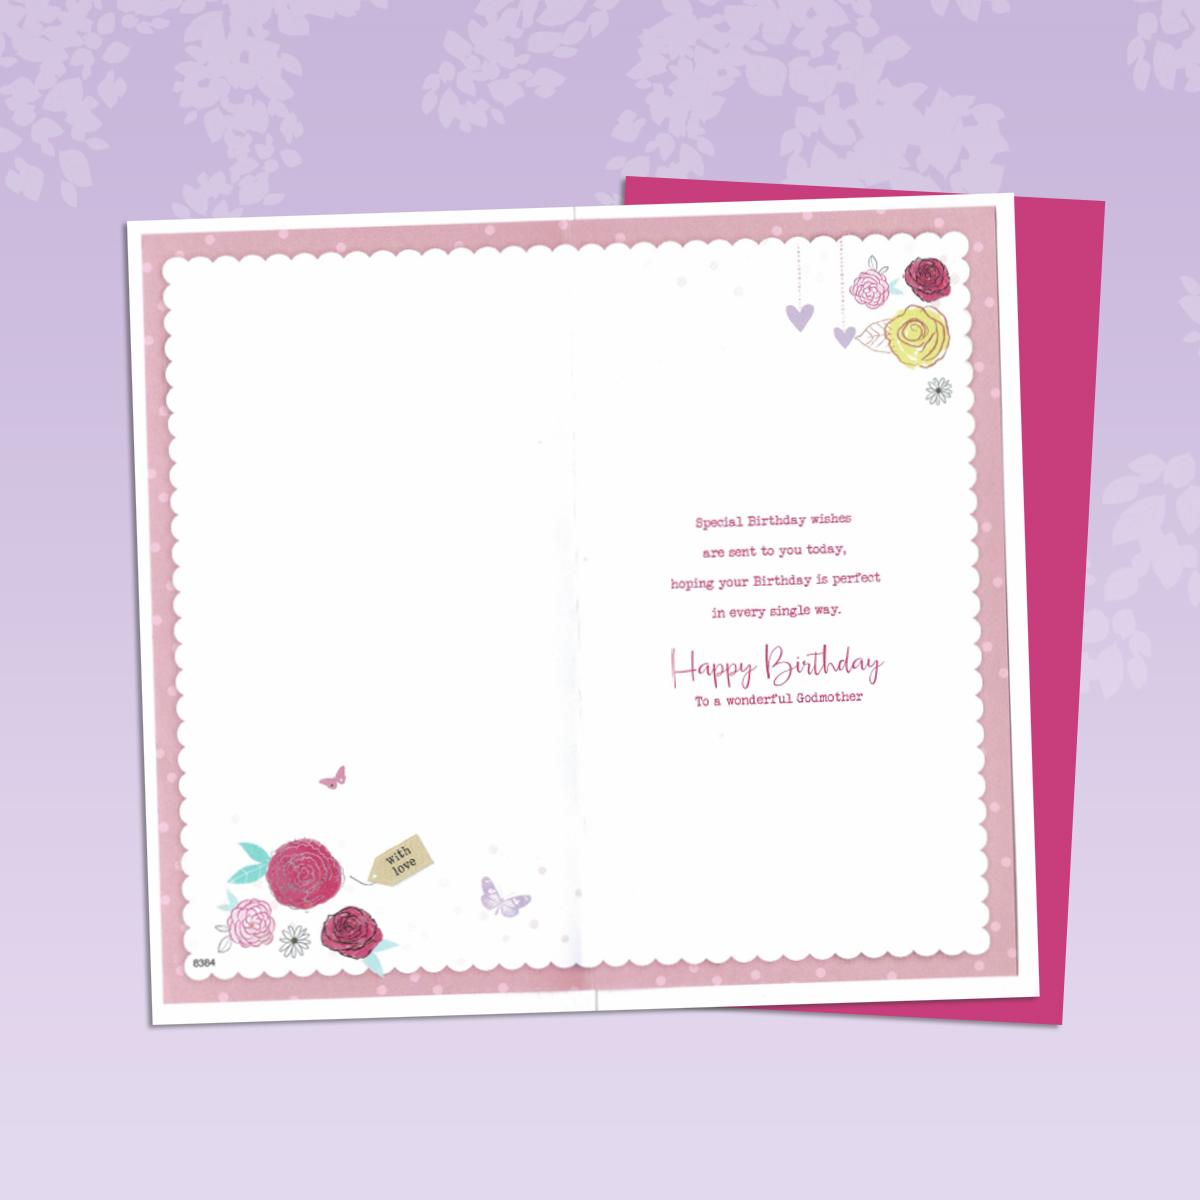 Inside Image Of Godmother Birthday Card Showing Layout